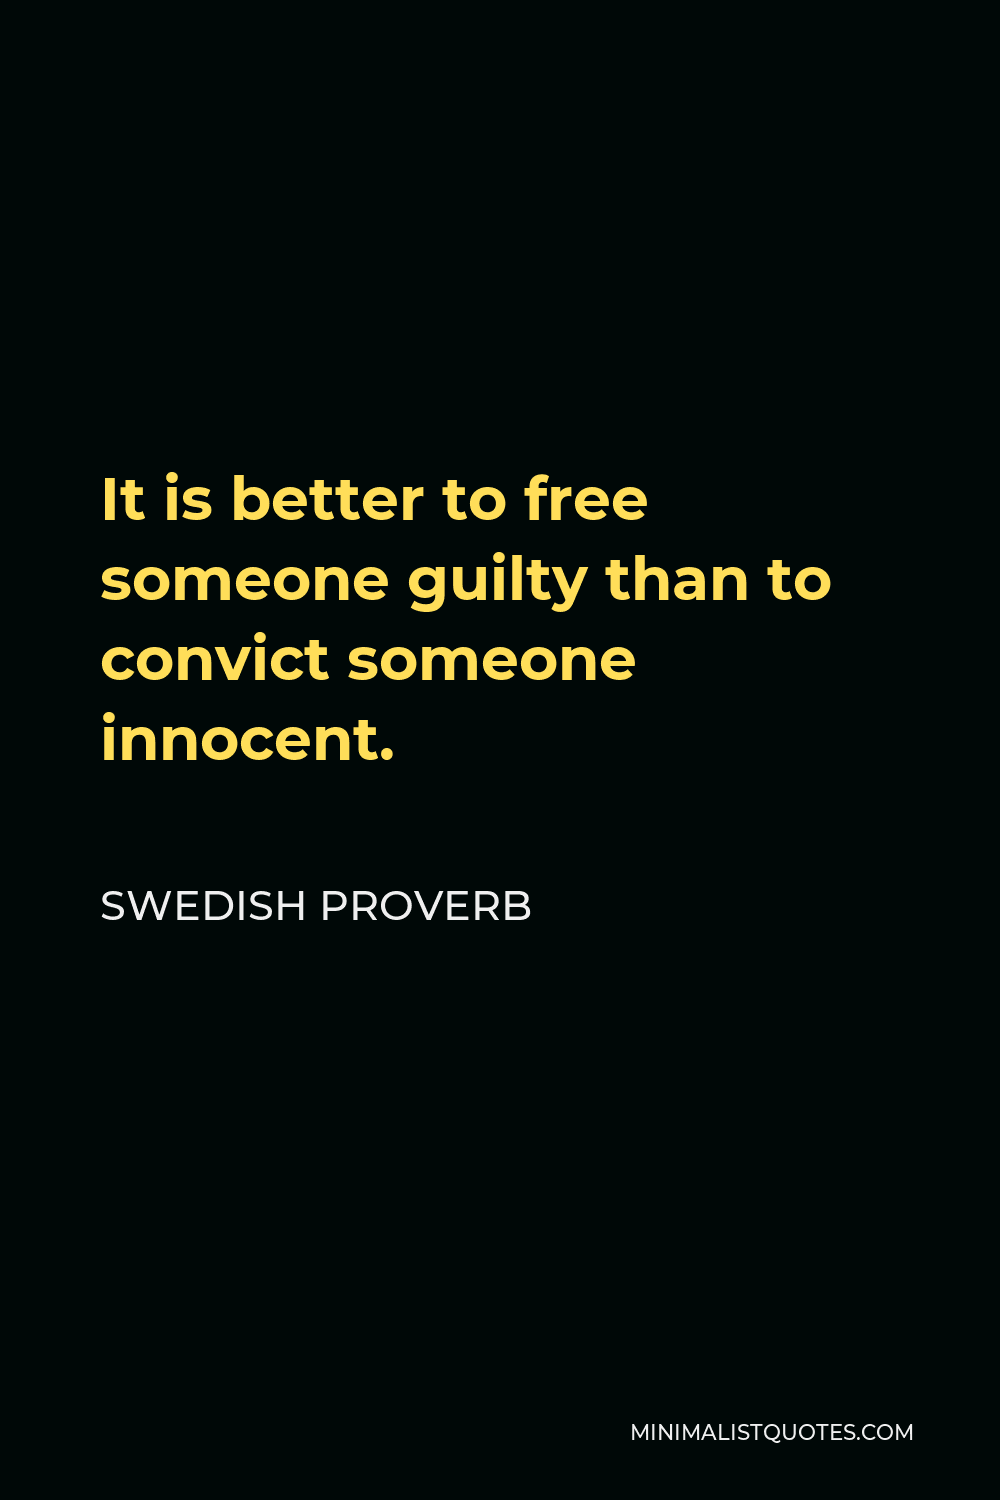 Swedish Proverb Quote - It is better to free someone guilty than to convict someone innocent.